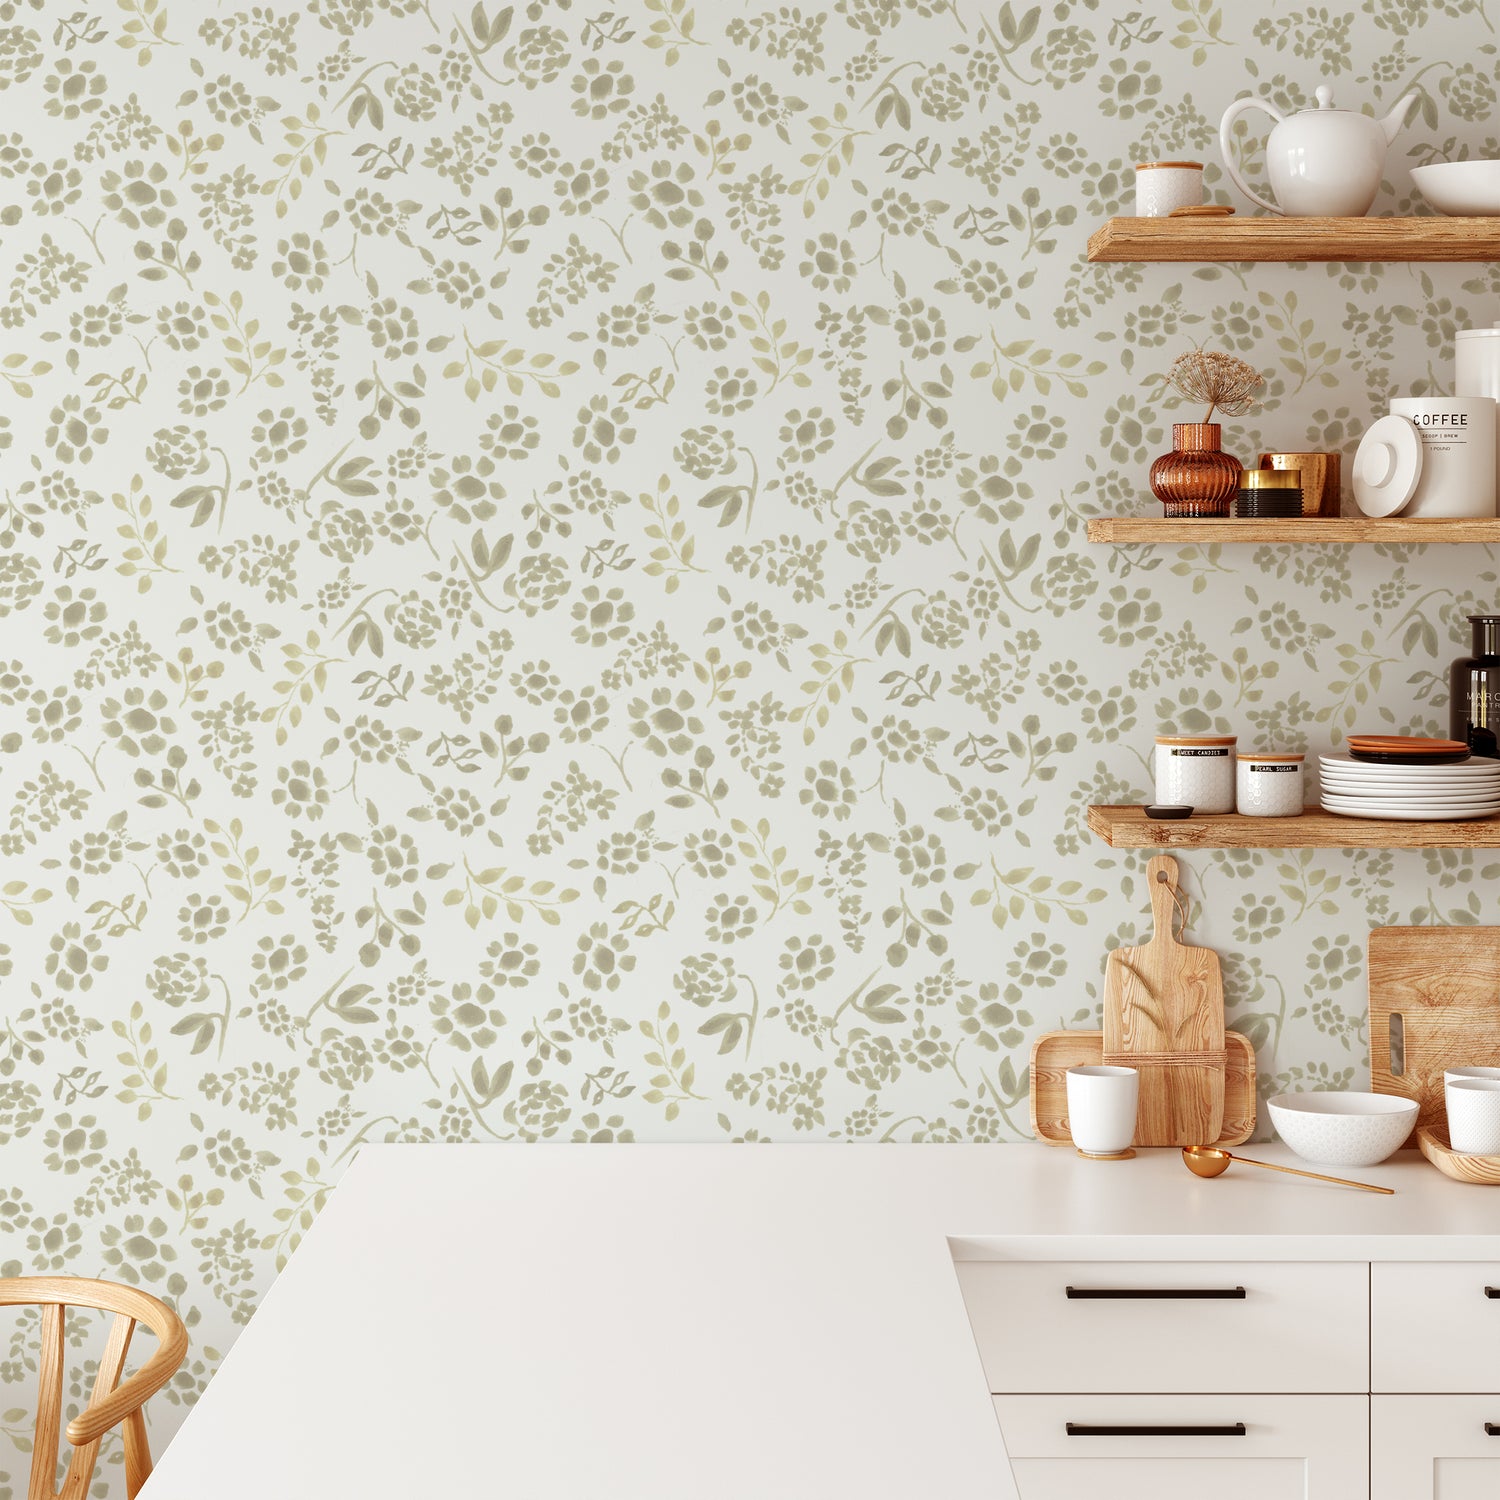 Transform any space into a chic and sophisticated haven with Jules Wallpaper. Its delicate and feminine design adds a touch of elegance to any room, creating an exclusive and luxurious atmosphere.